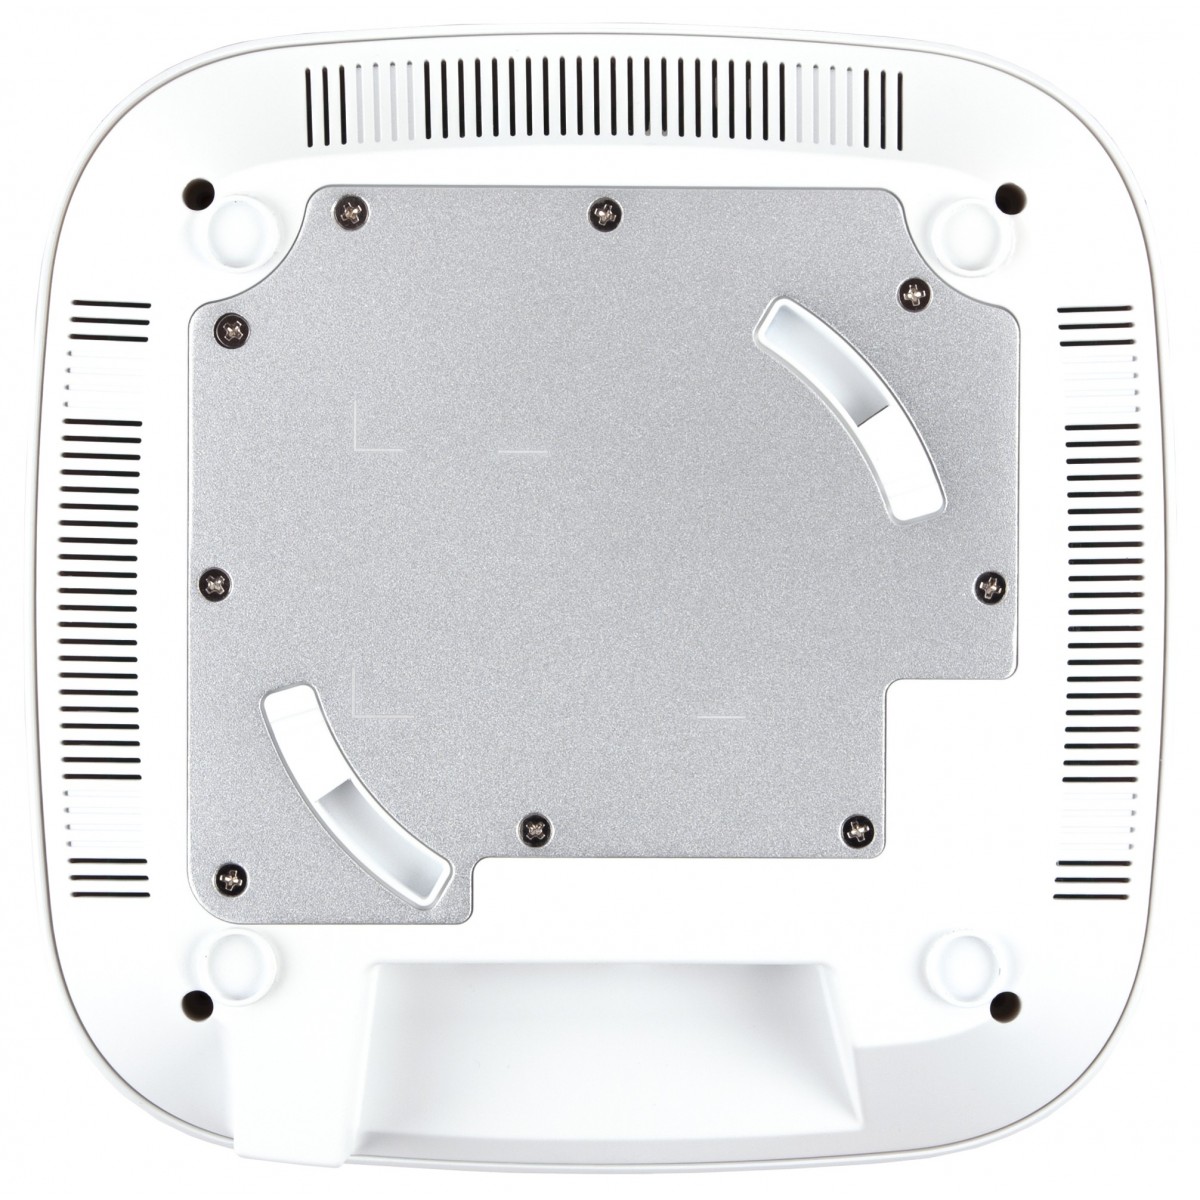 D-Link AX3600 Wi-Fi 6 Dual-Band PoE Access Point - 3600 Mbit/s - 1147 Mbit/s - 2402 Mbit/s - 10,100,1000,2500 Mbit/s - 2.4 - 2.4